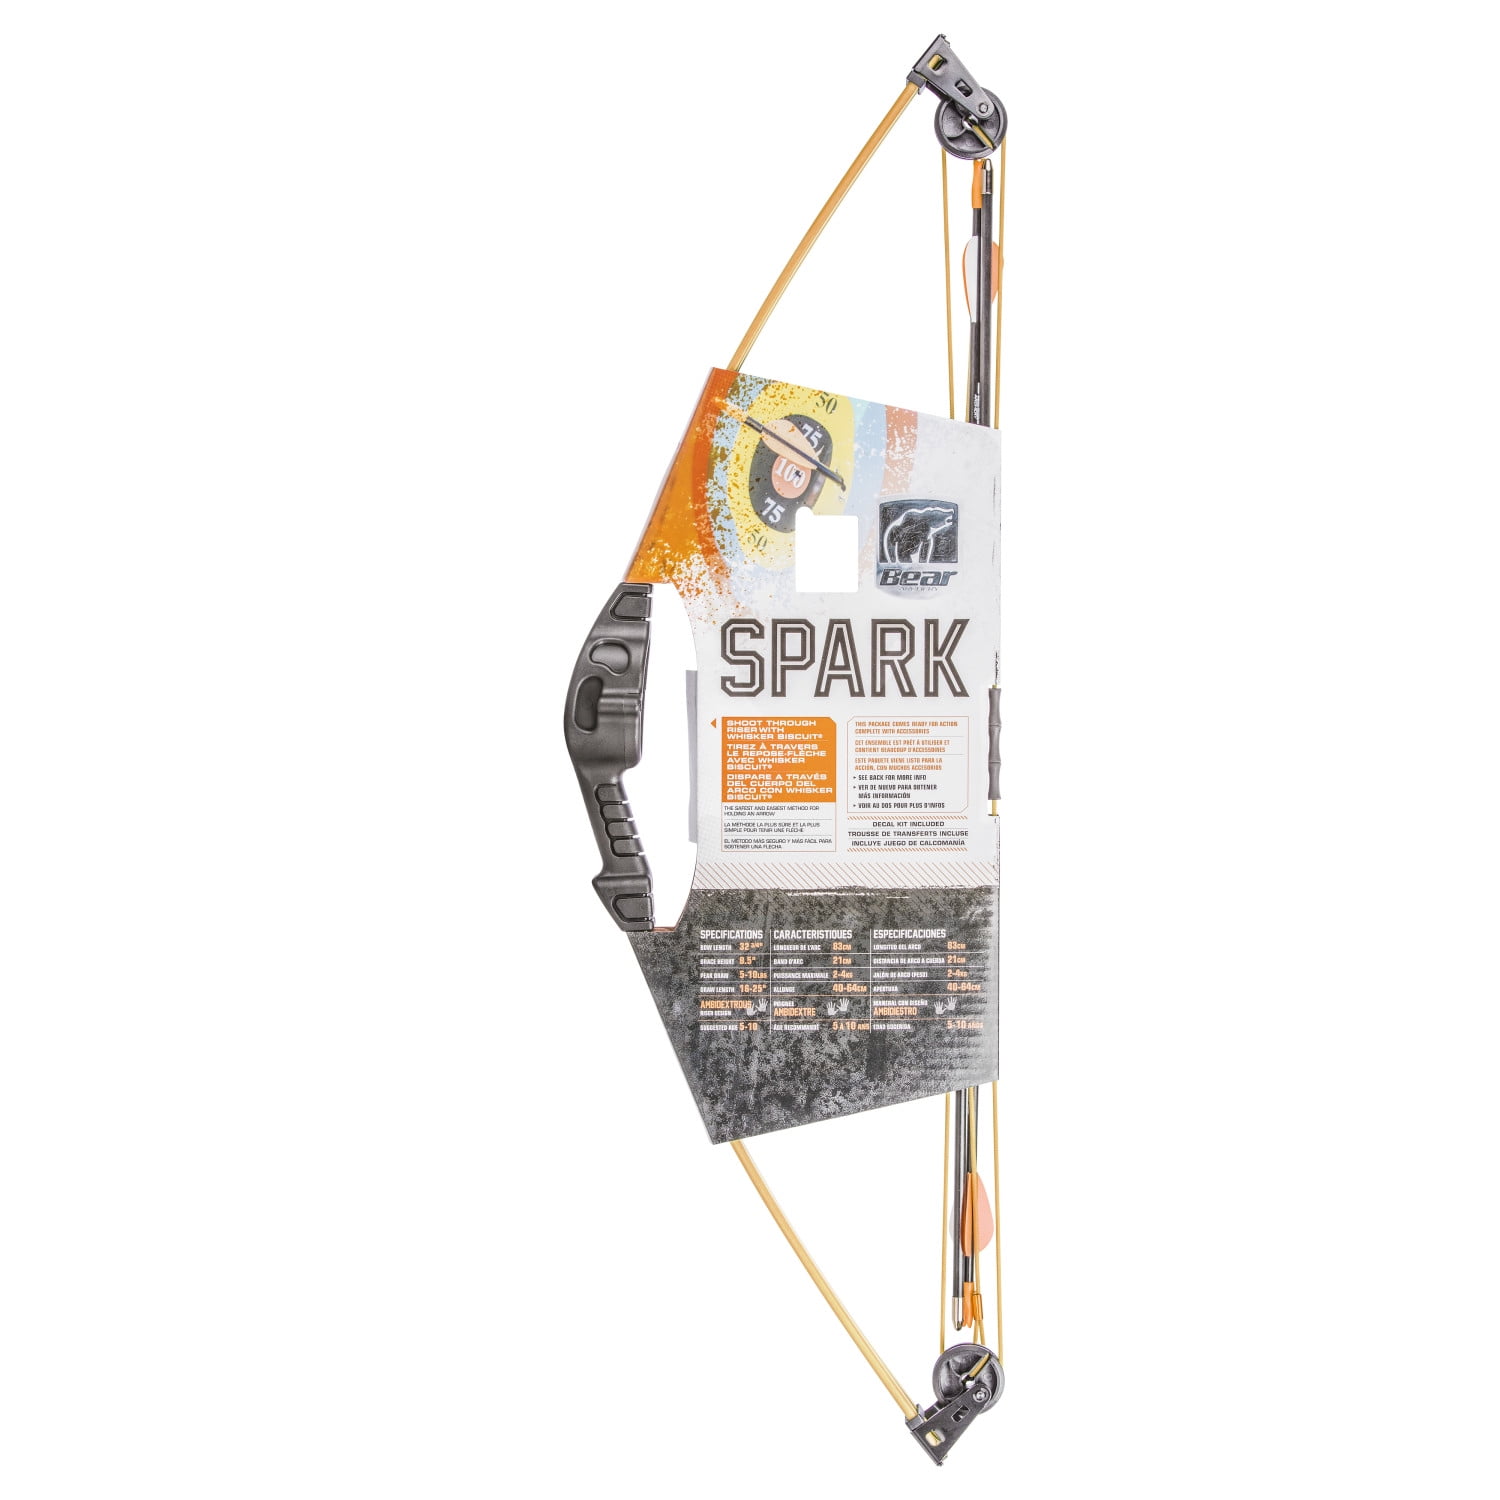 Quiver Bear Archery Spark Youth Bow Set Includes 2 Arrows and Recommended for Ages 5 to 10 Armguard 